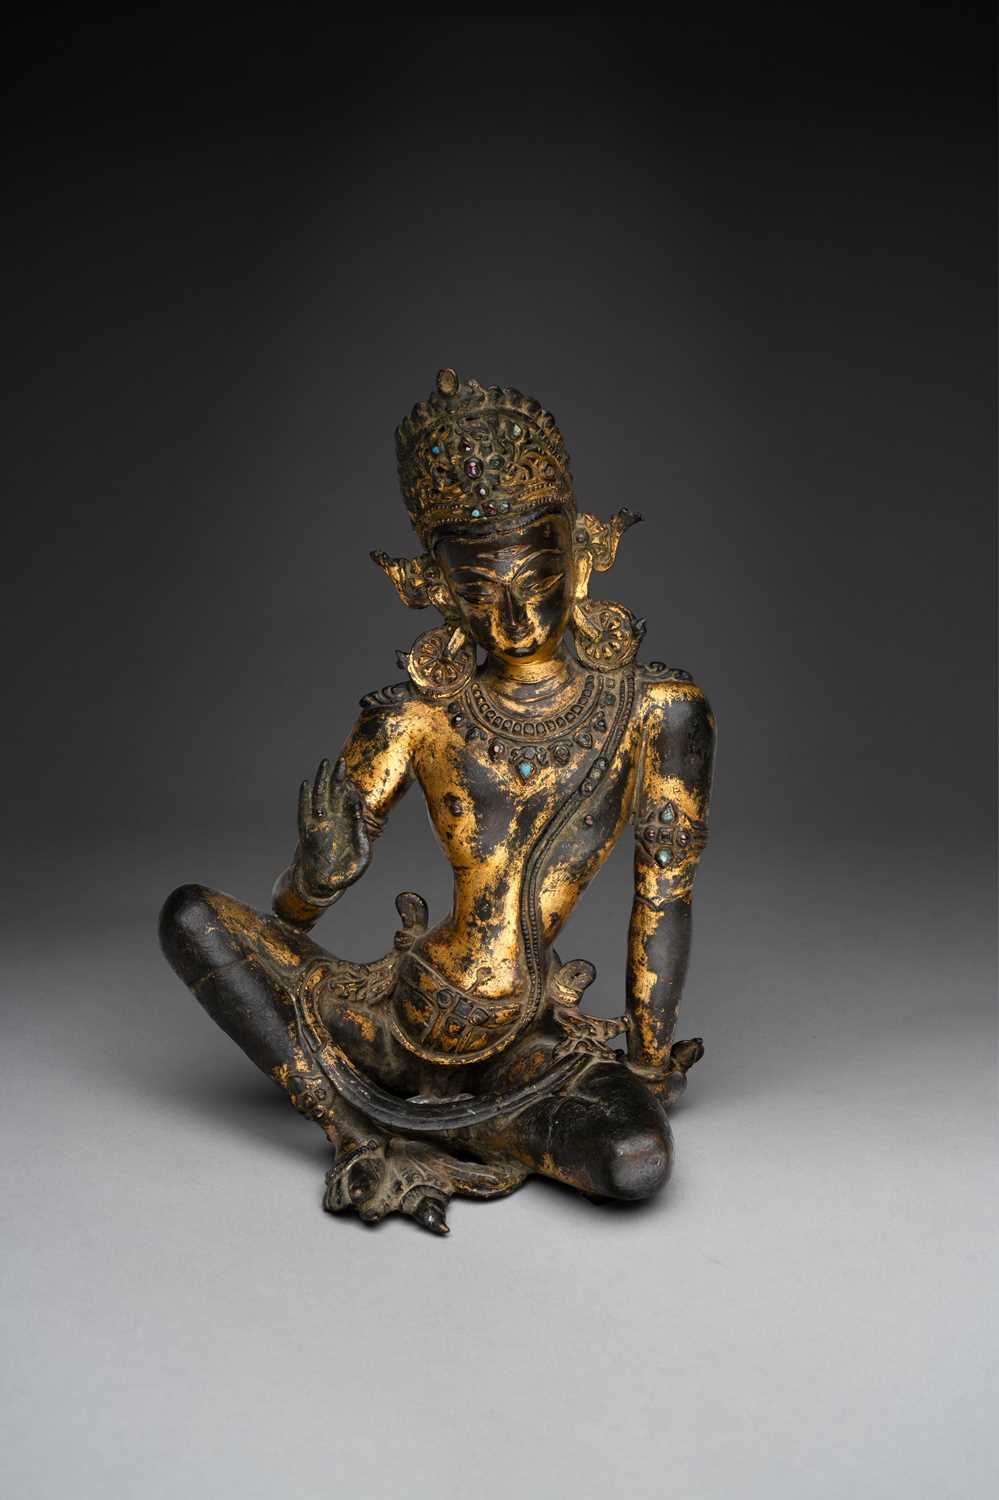 A RARE NEPALESE GILT-COPPER FIGURE OF INDRA 14TH CENTURY Seated in maharajalilasana with his right